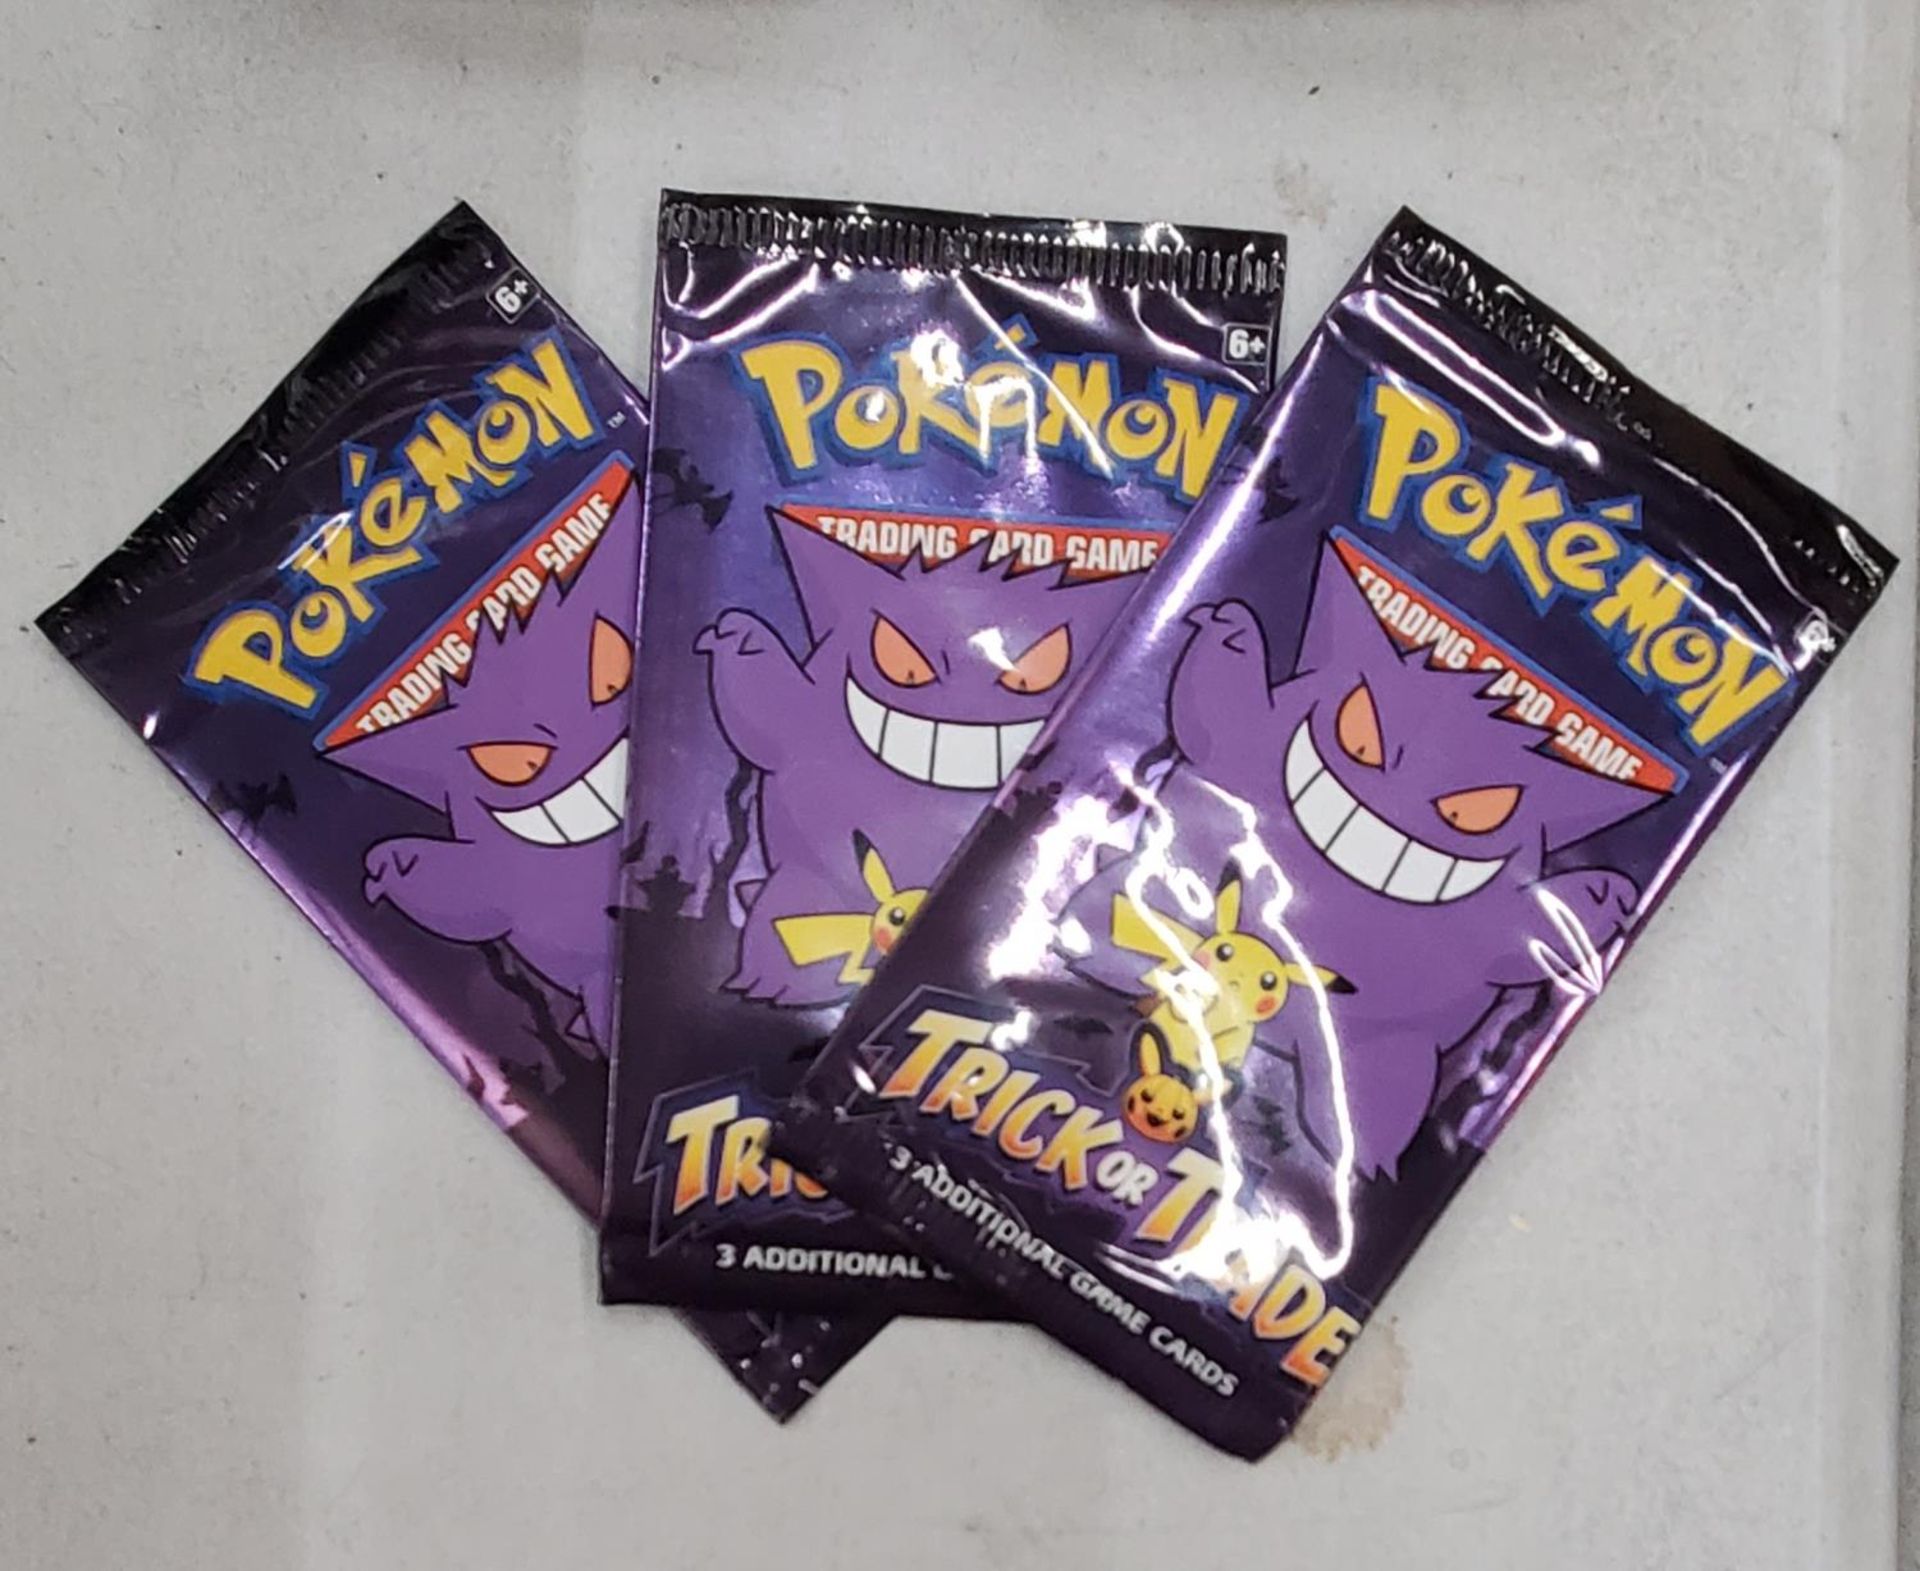 THREE SEALED POKEMON TRICK OR TRADE BOO-STER PACKS